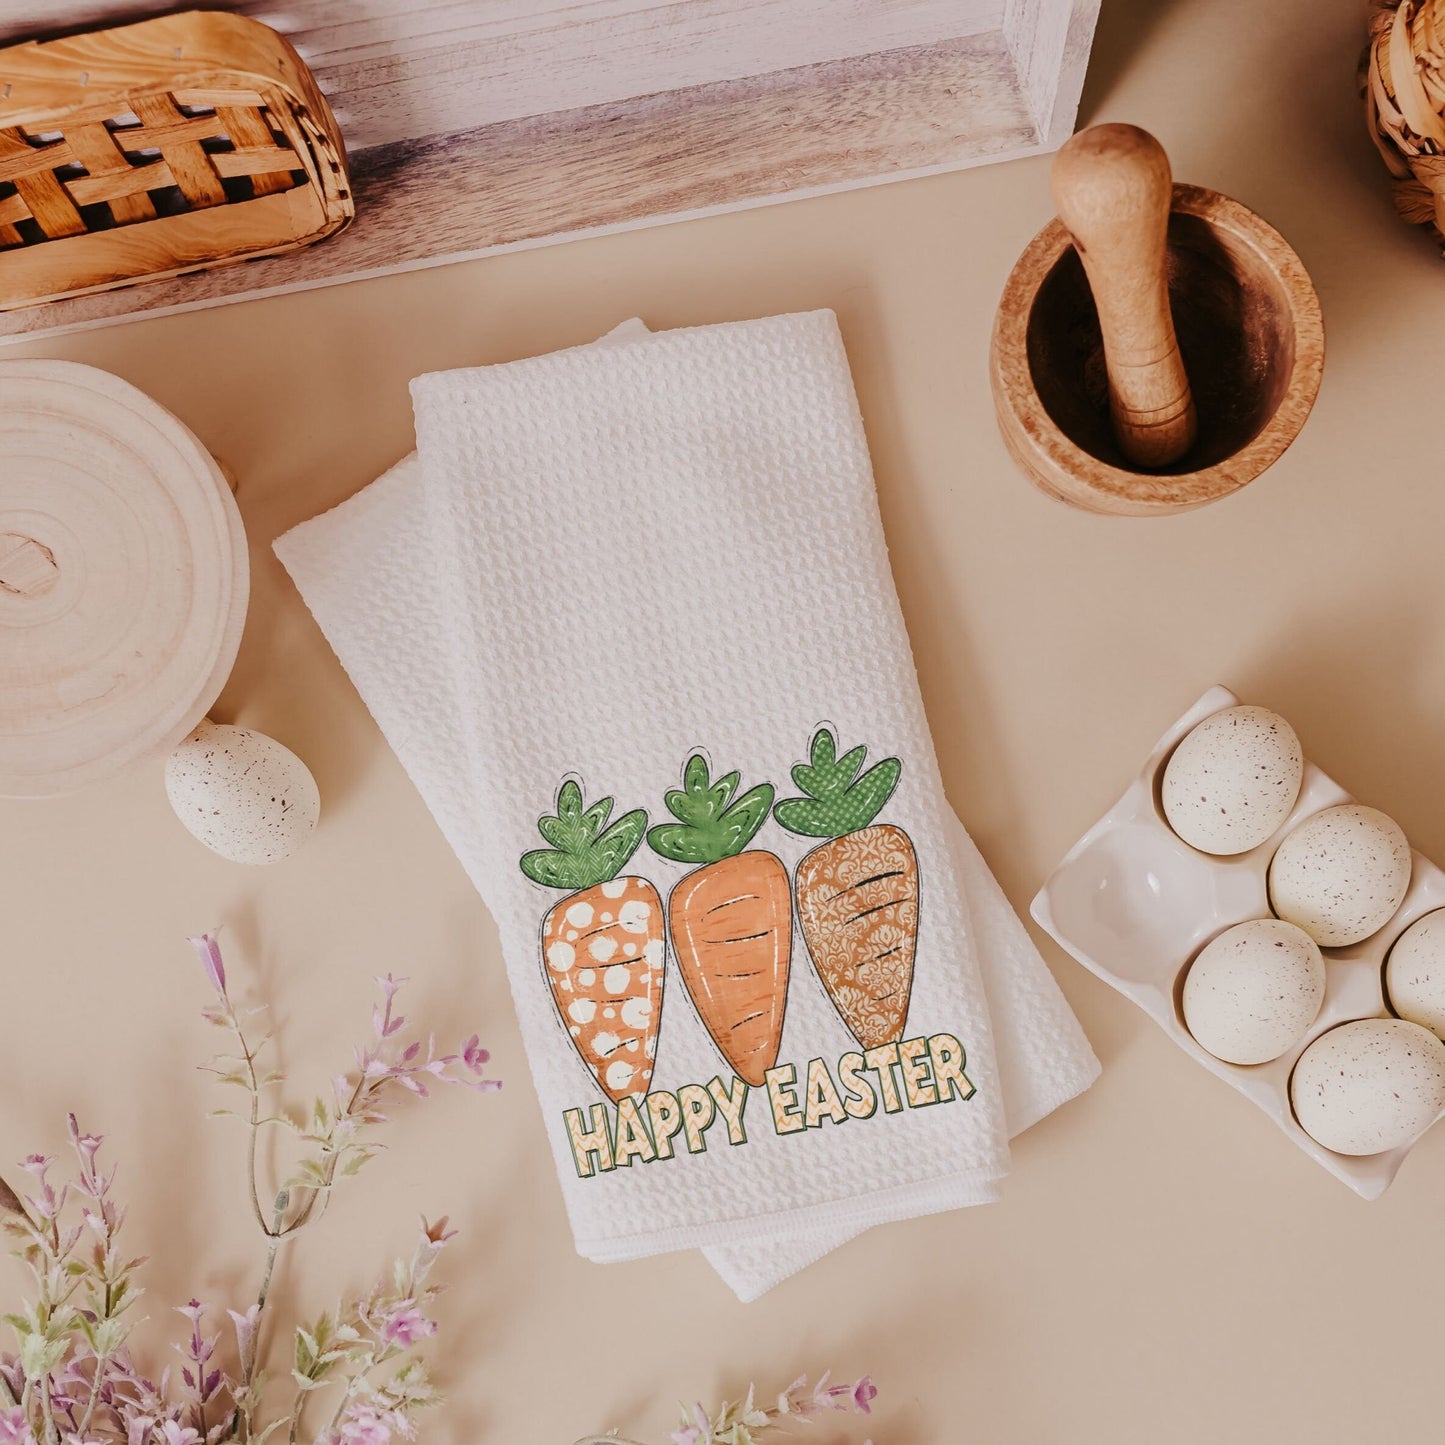 Happy Easter kitchen towels